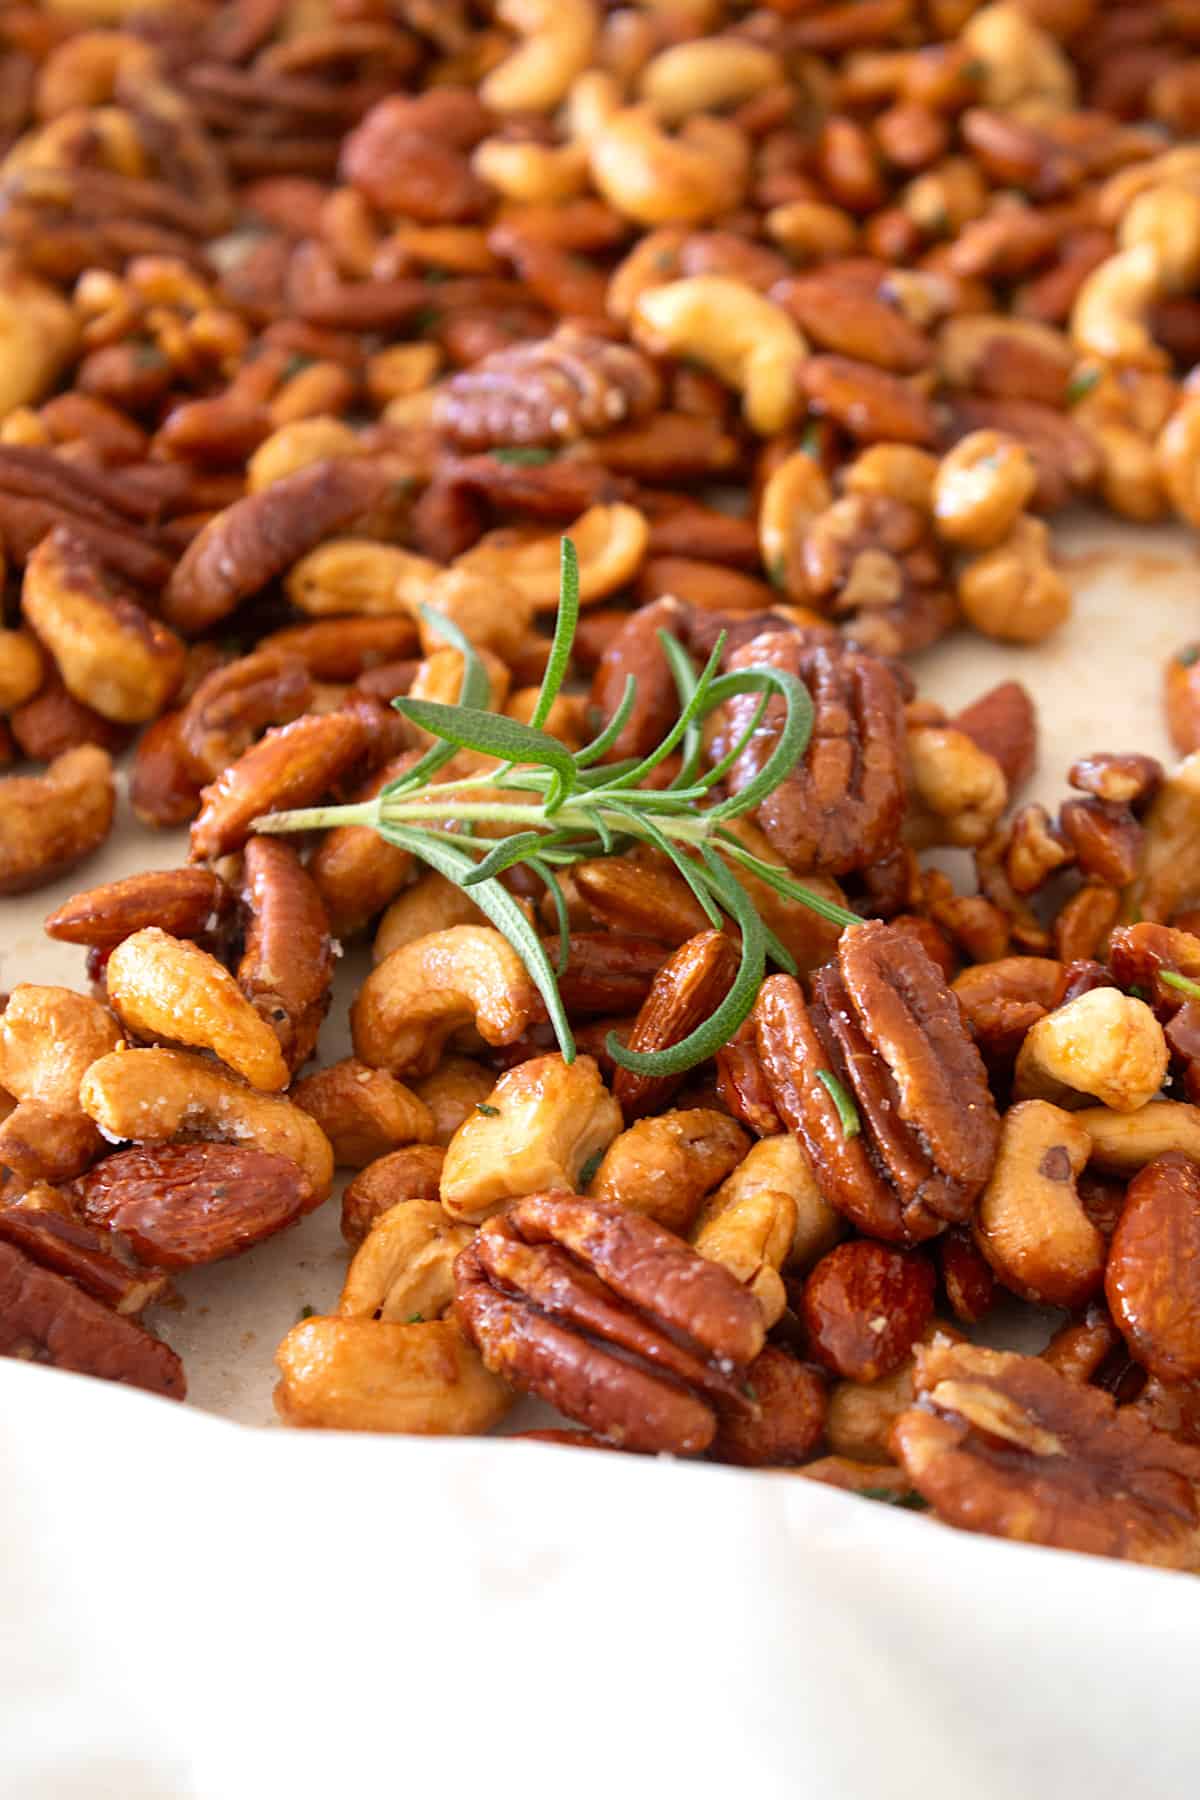 honey roasted nuts out of the oven on a baking sheet